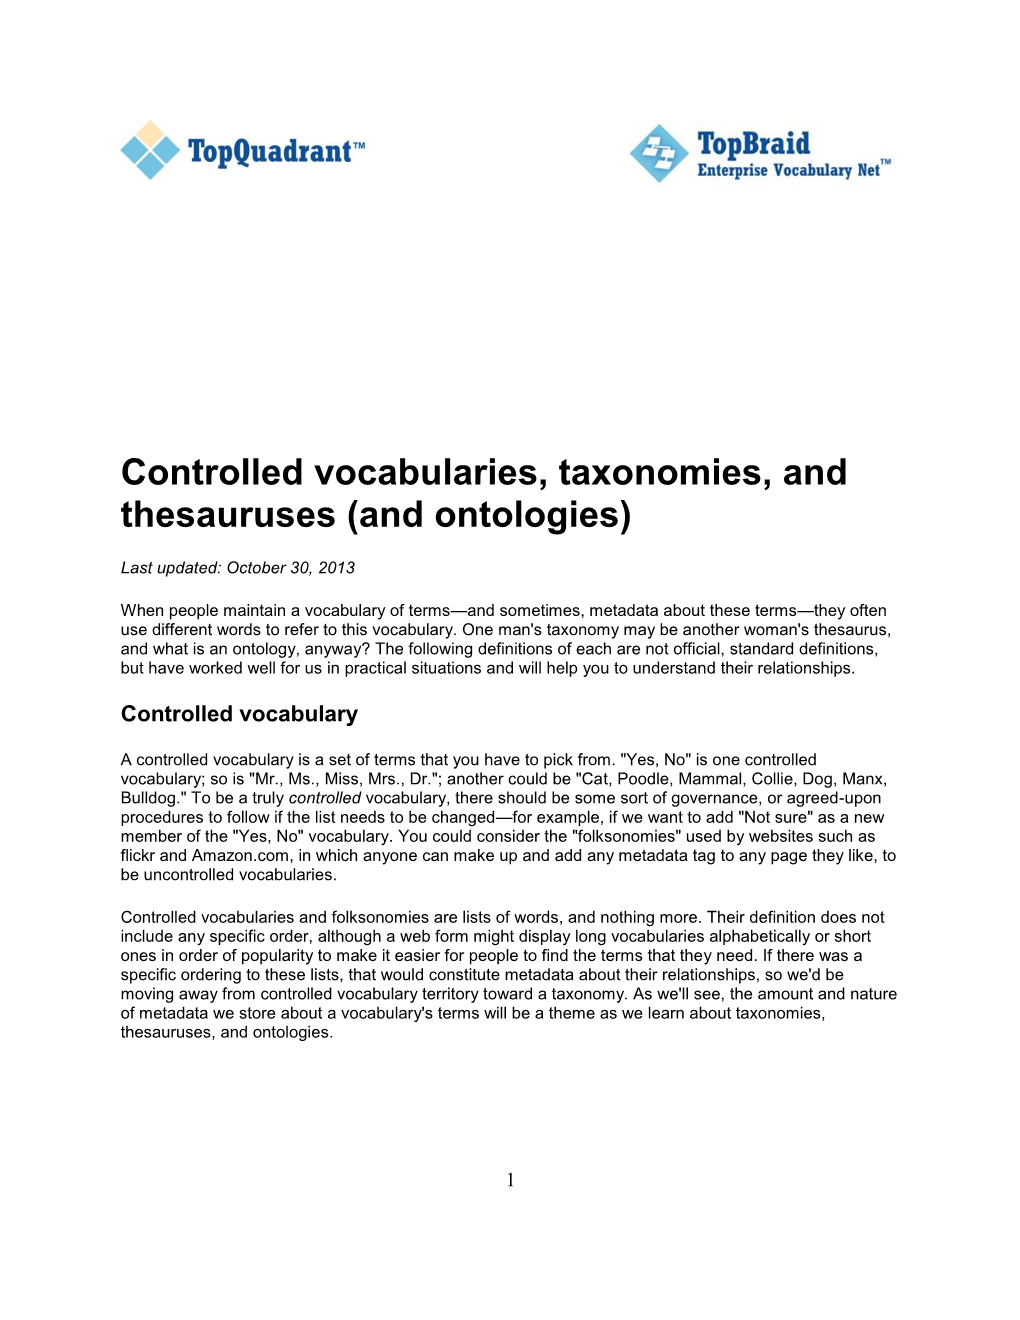 Controlled Vocabularies, Taxonomies, and Thesauruses (And Ontologies)